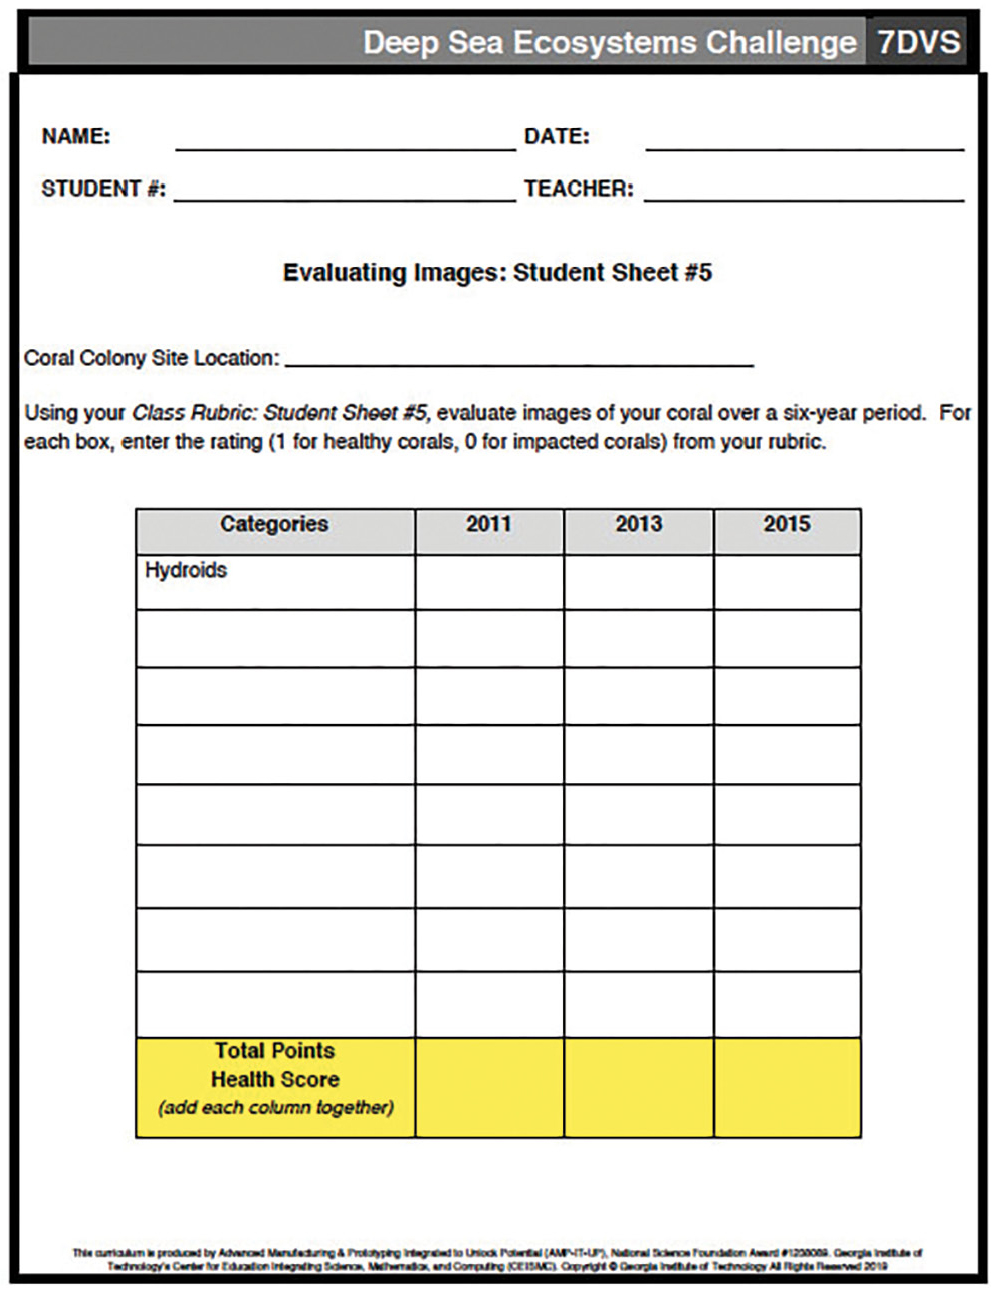 Student worksheet for evaluating images of coral and determining health scores.